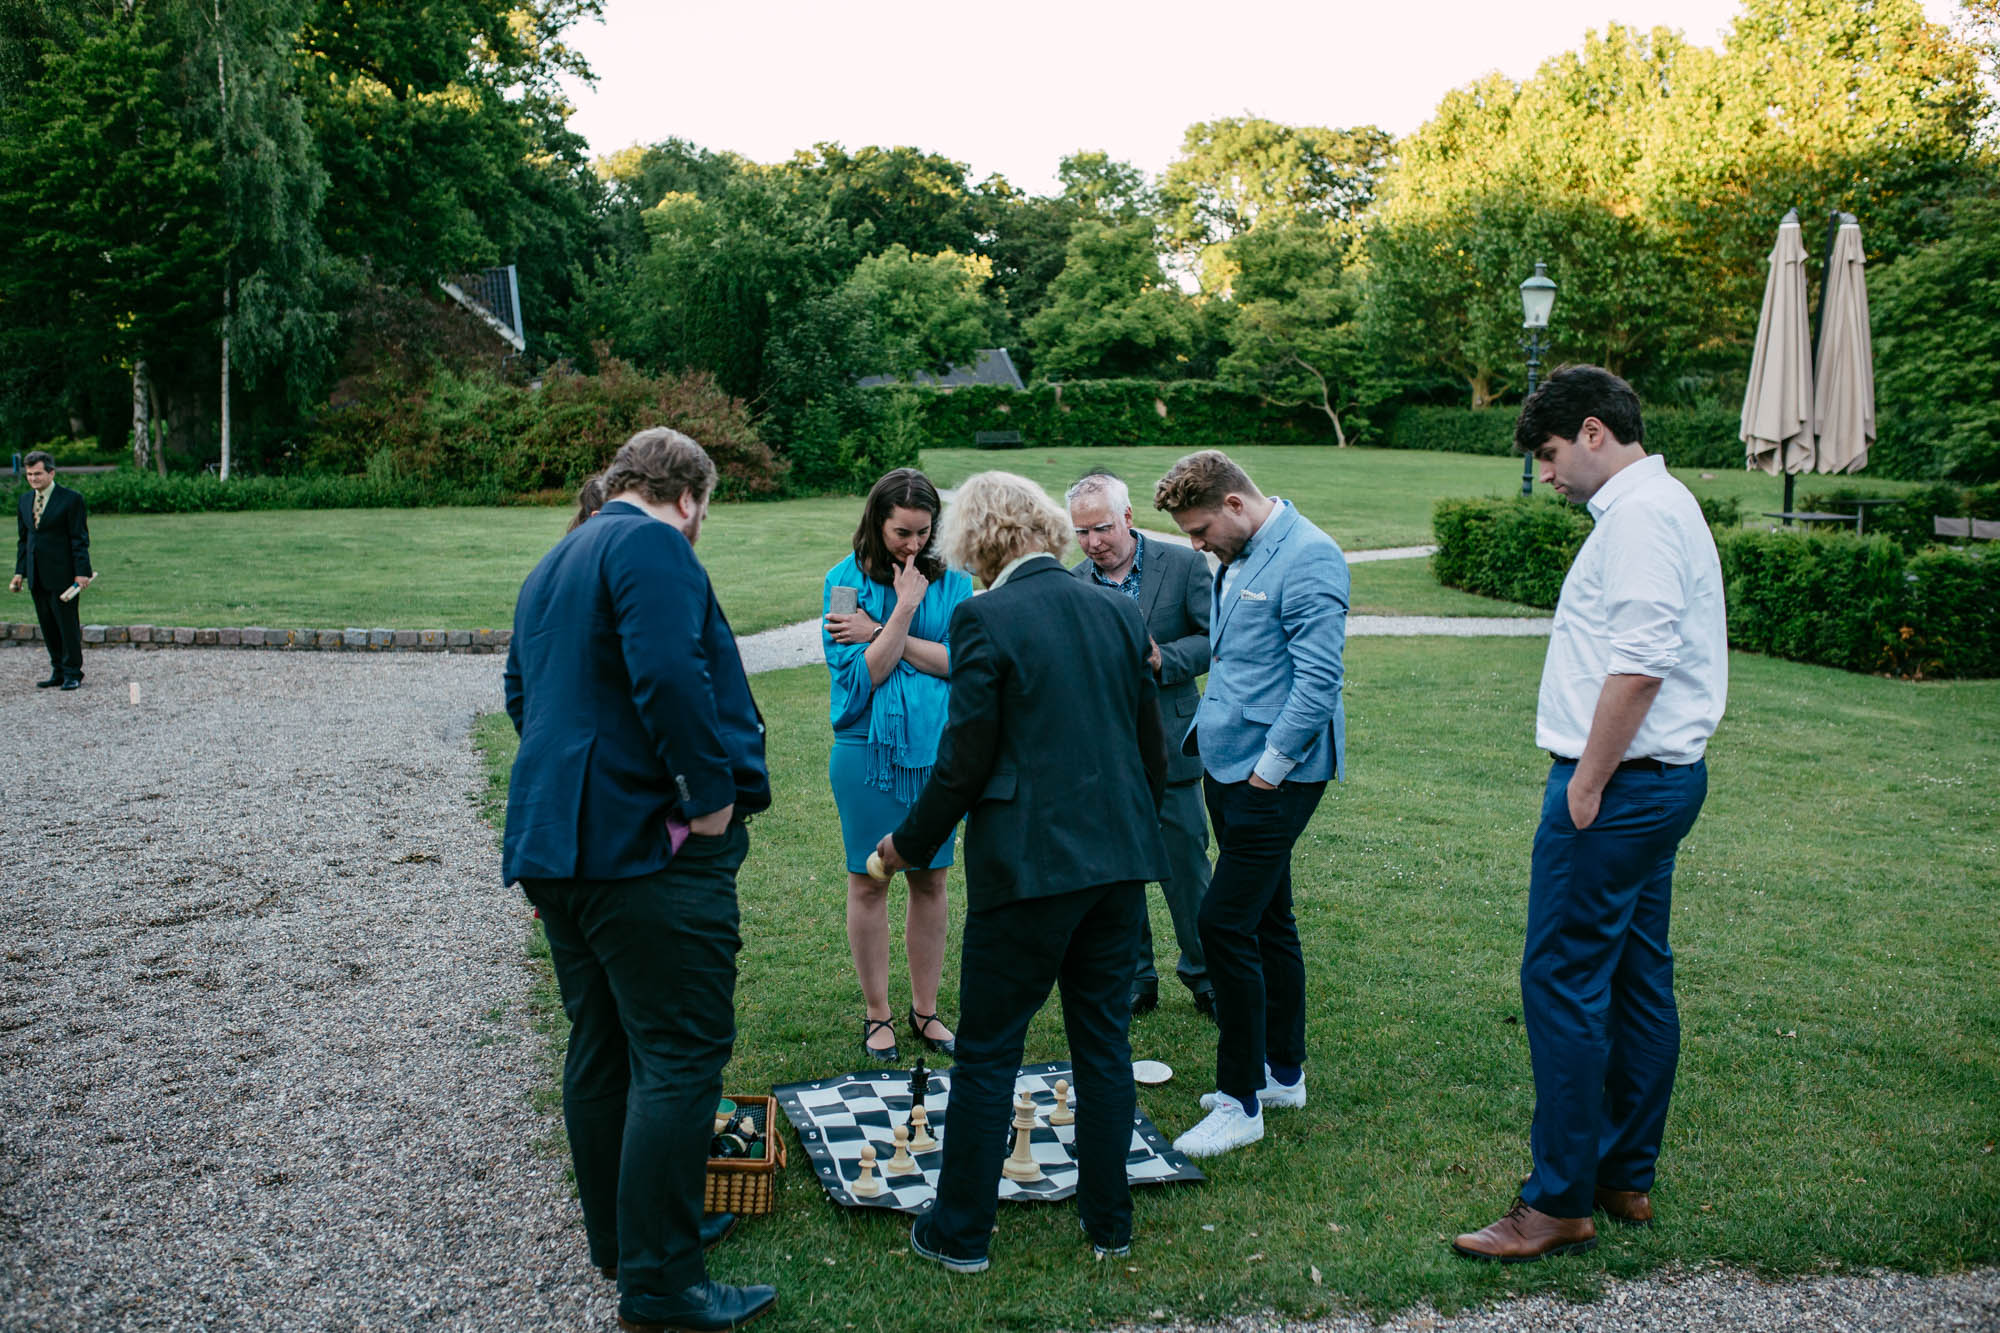 A group of people playing chess in a garden while enjoying a friendly game during a wedding celebration.